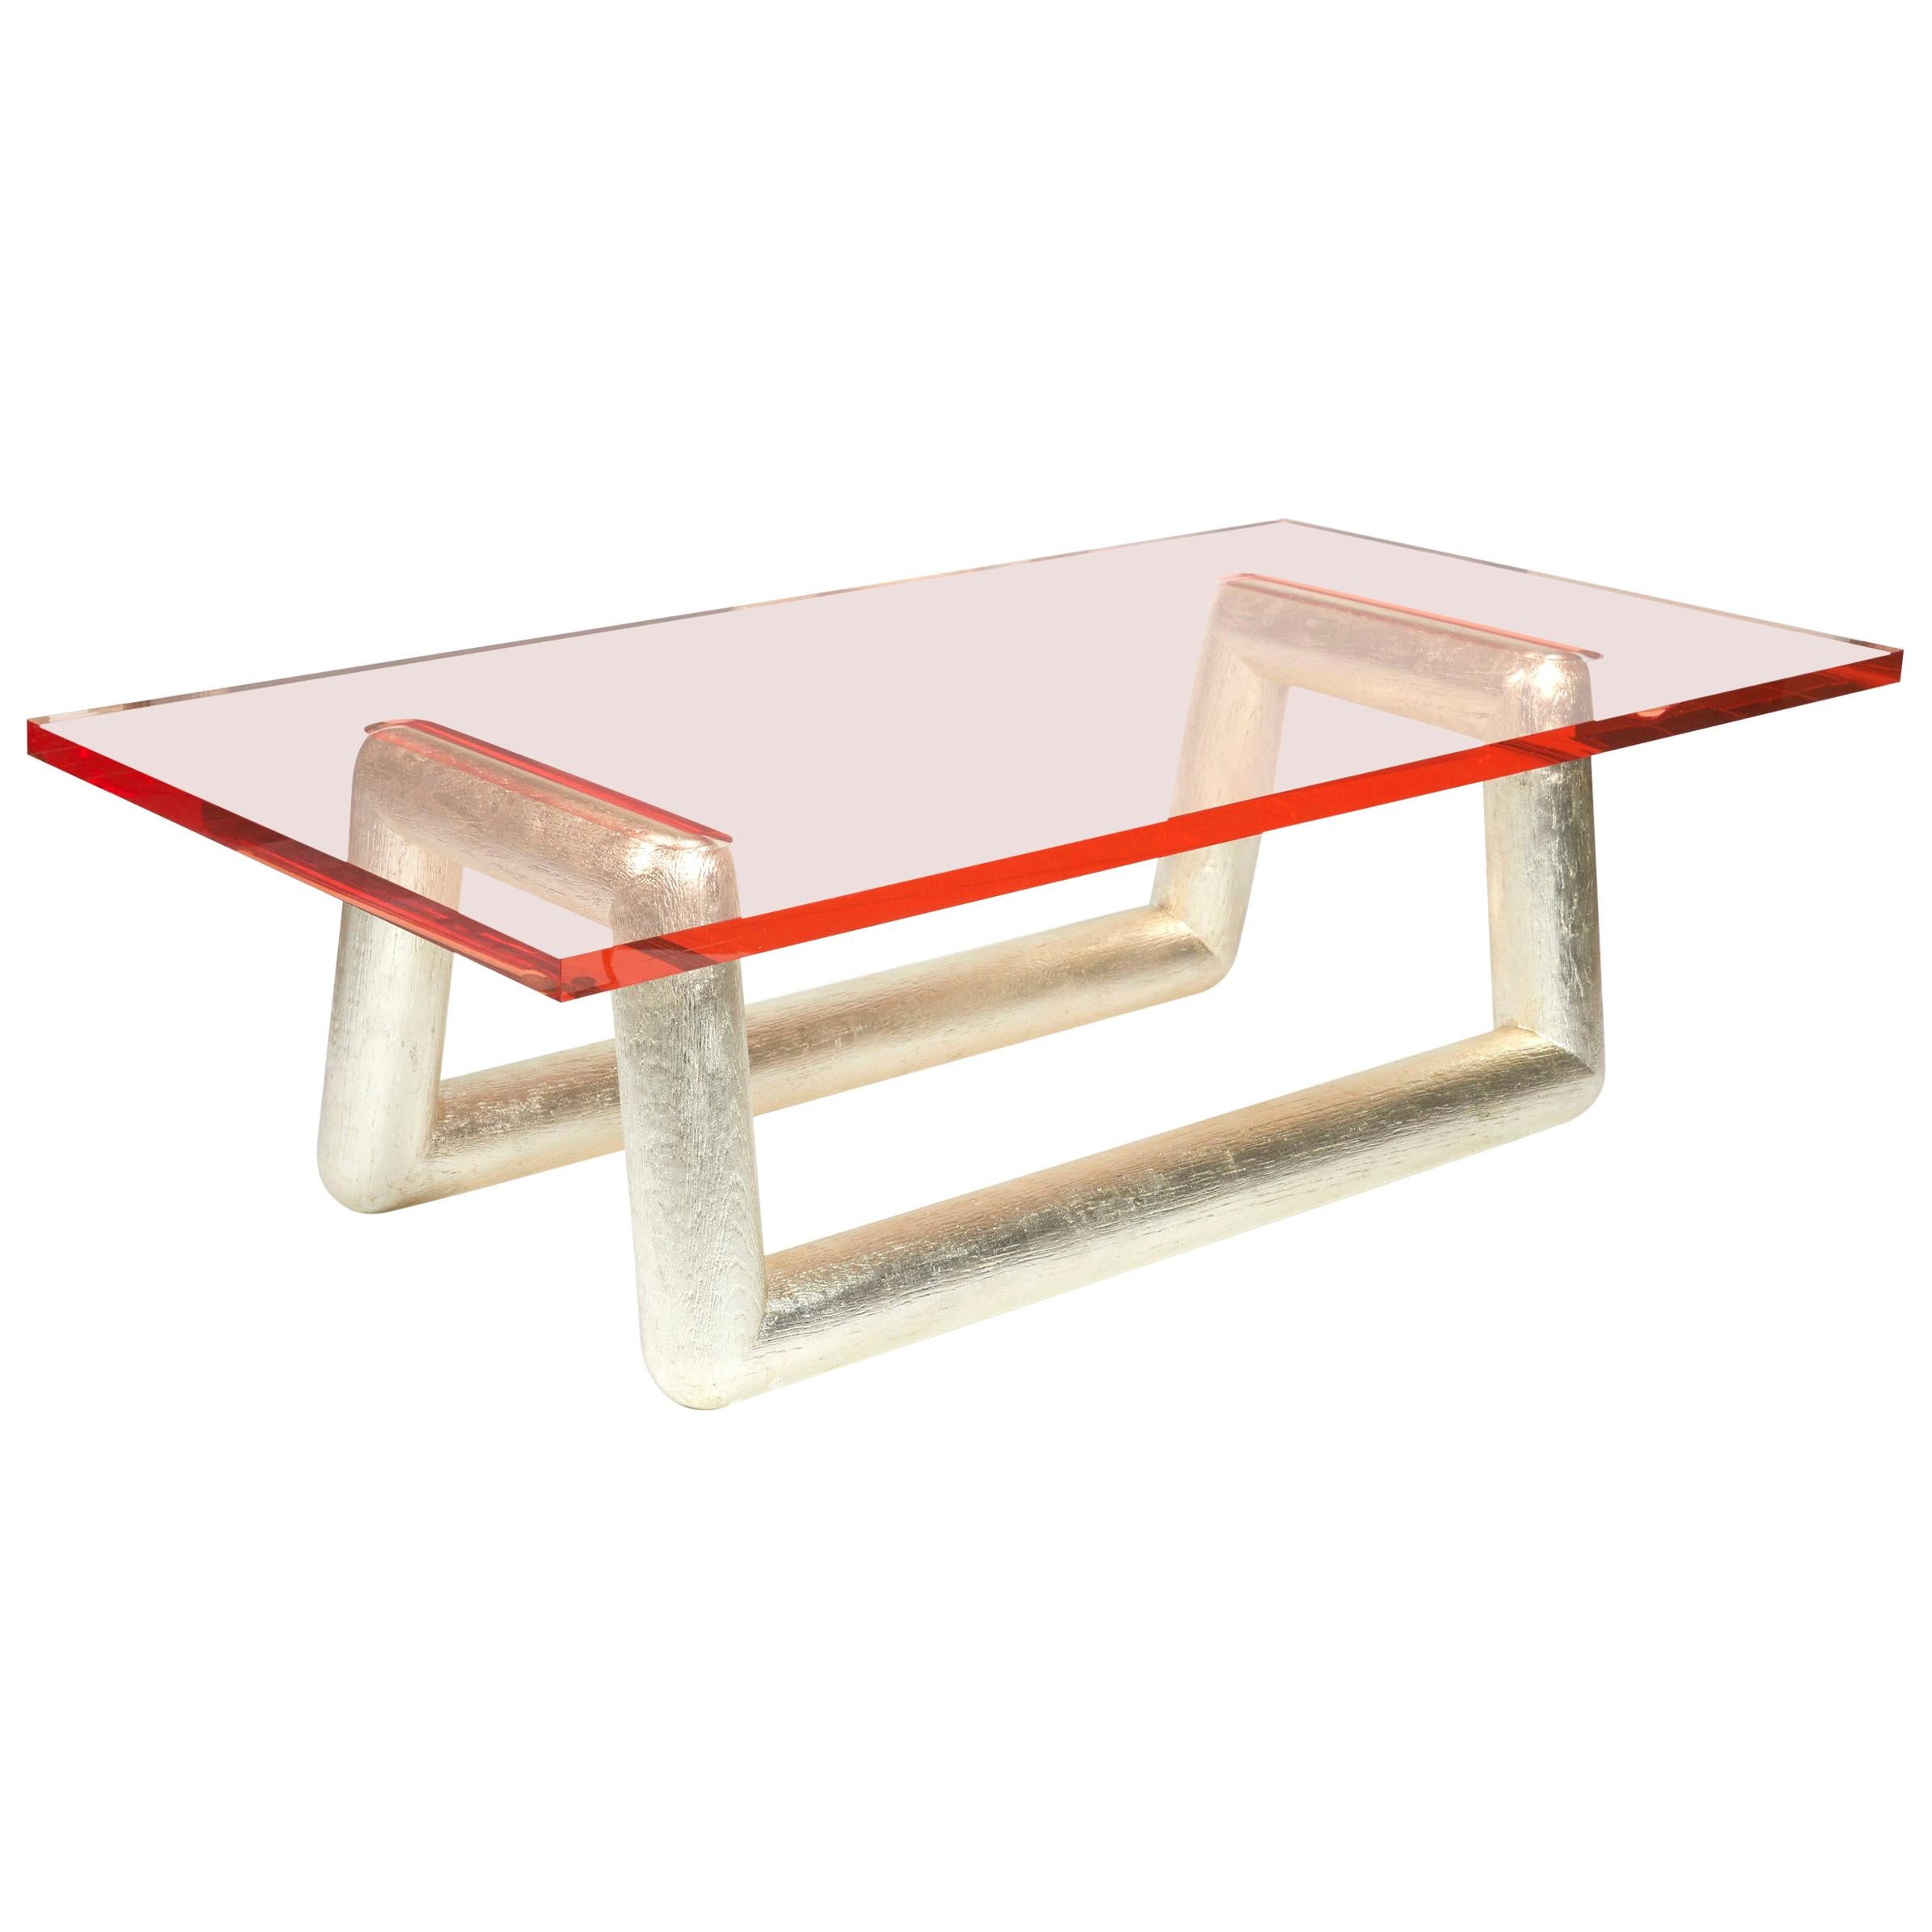 Jelly Coffee Table by Mattia Bonetti. Acrylic and sanded oak. For Sale